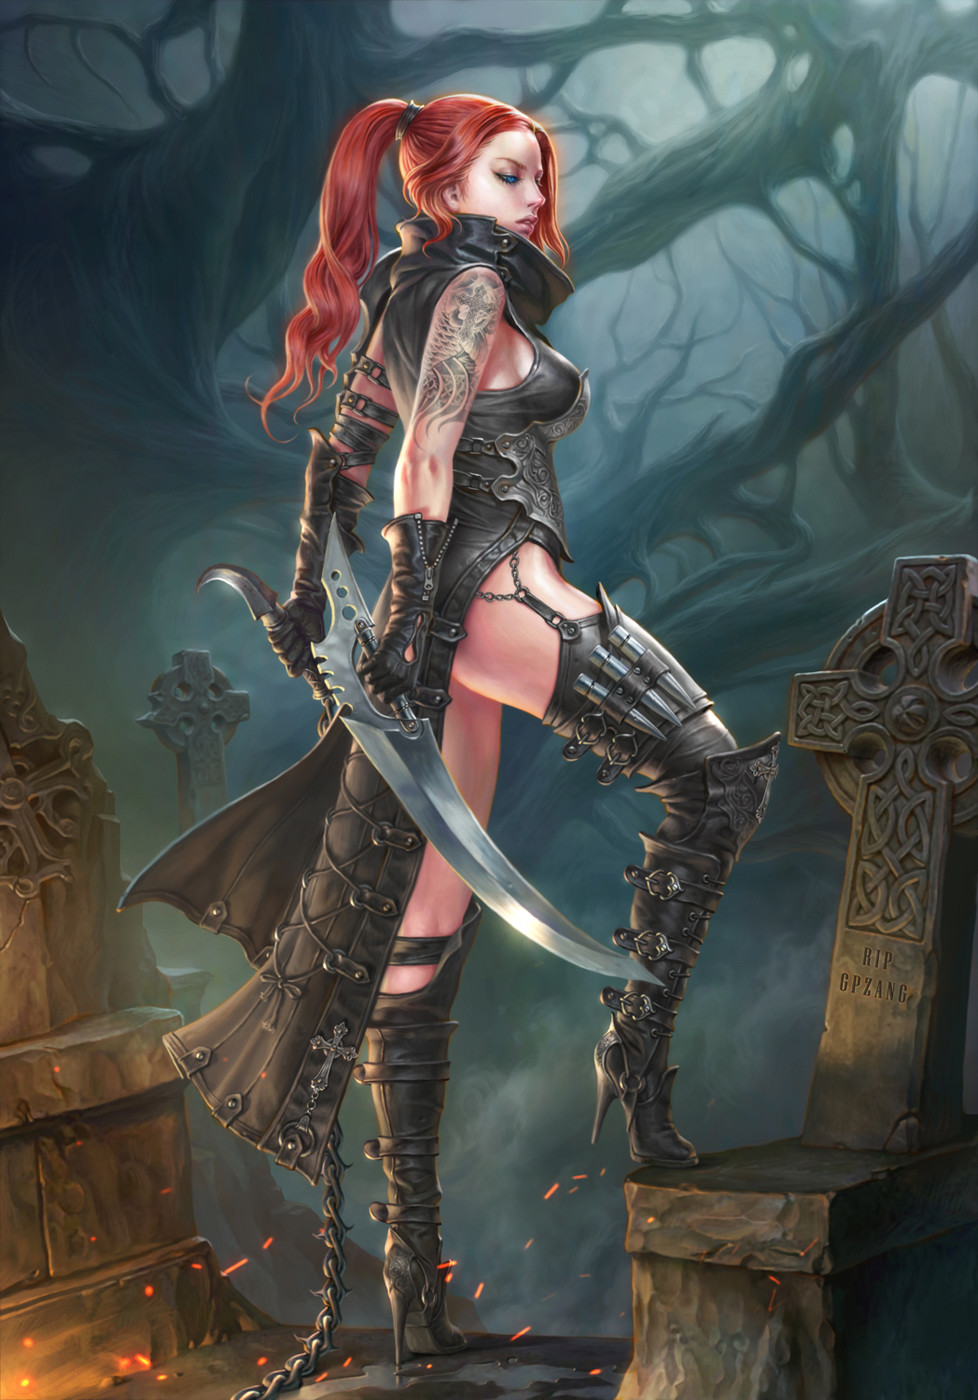 General 978x1400 Young June Choi drawing women warrior redhead ponytail armor weapon blades sword chains sparks roots trees graveyards fantasy art fantasy girl women with swords high heeled boots legs standing heels thighs sideboob